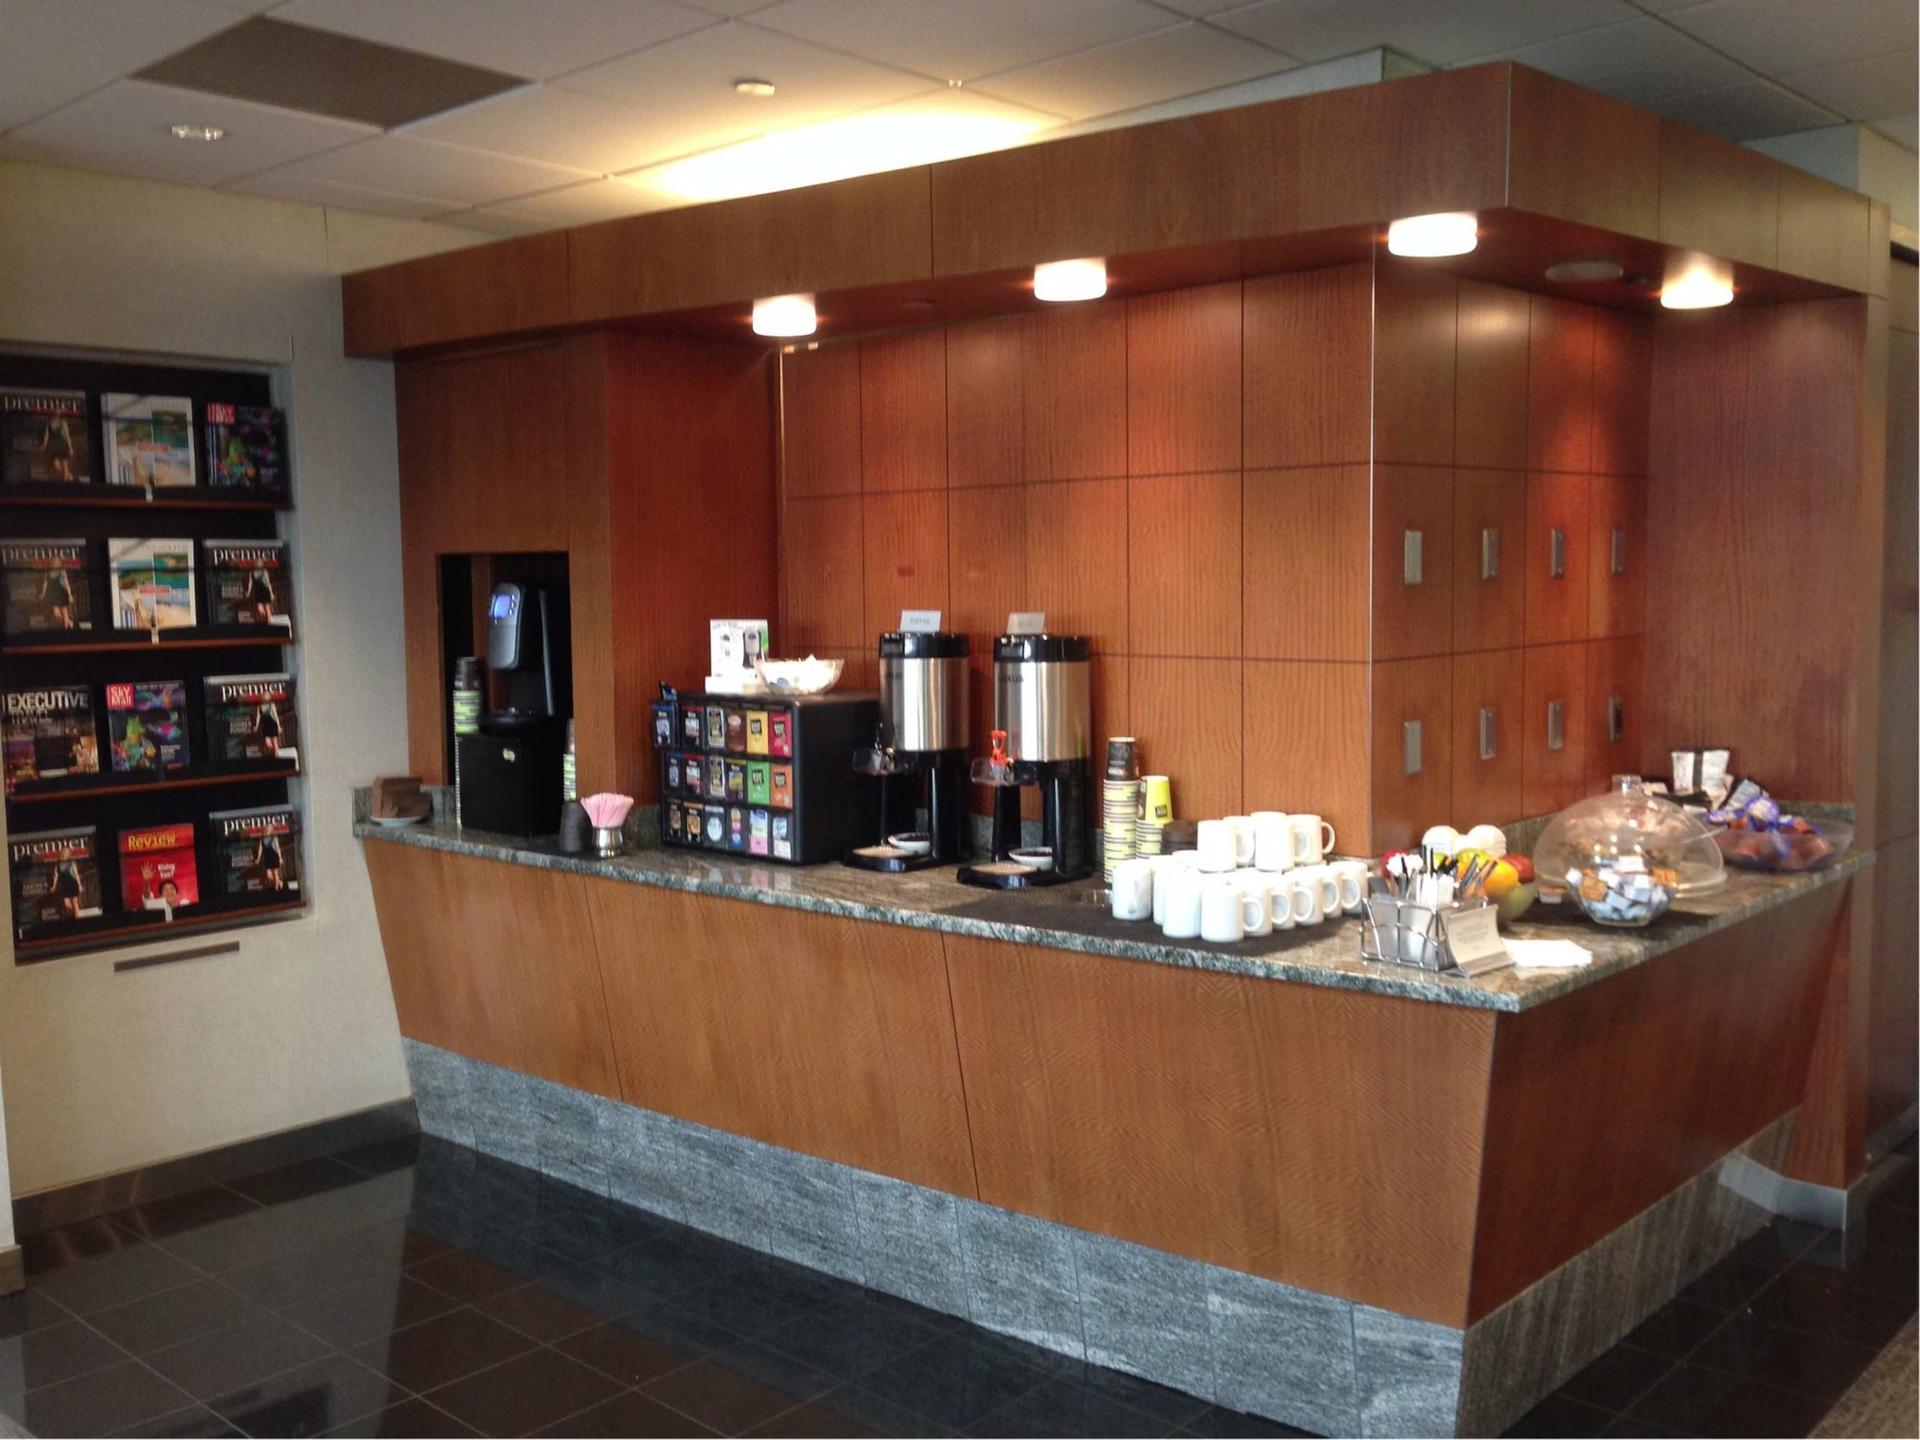 American Airlines Admirals Club image 28 of 48